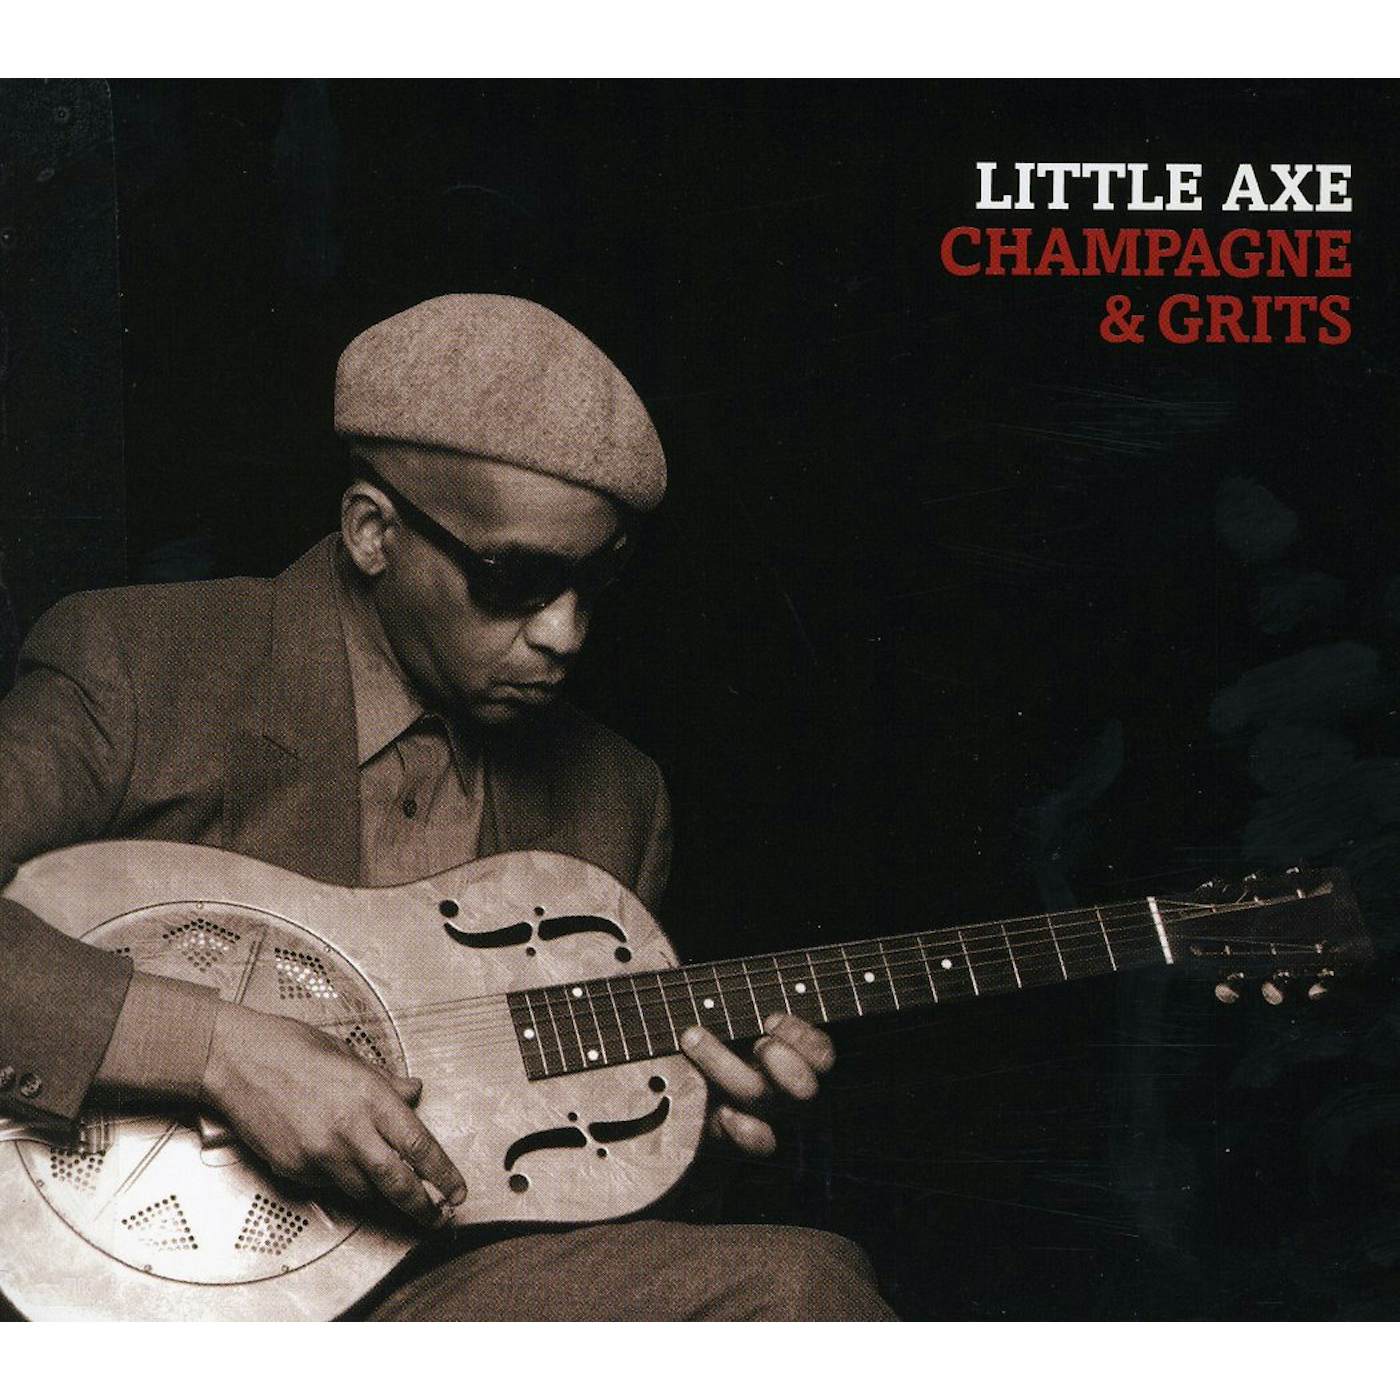 Little Axe CHAMPAGNE & GRITS CD